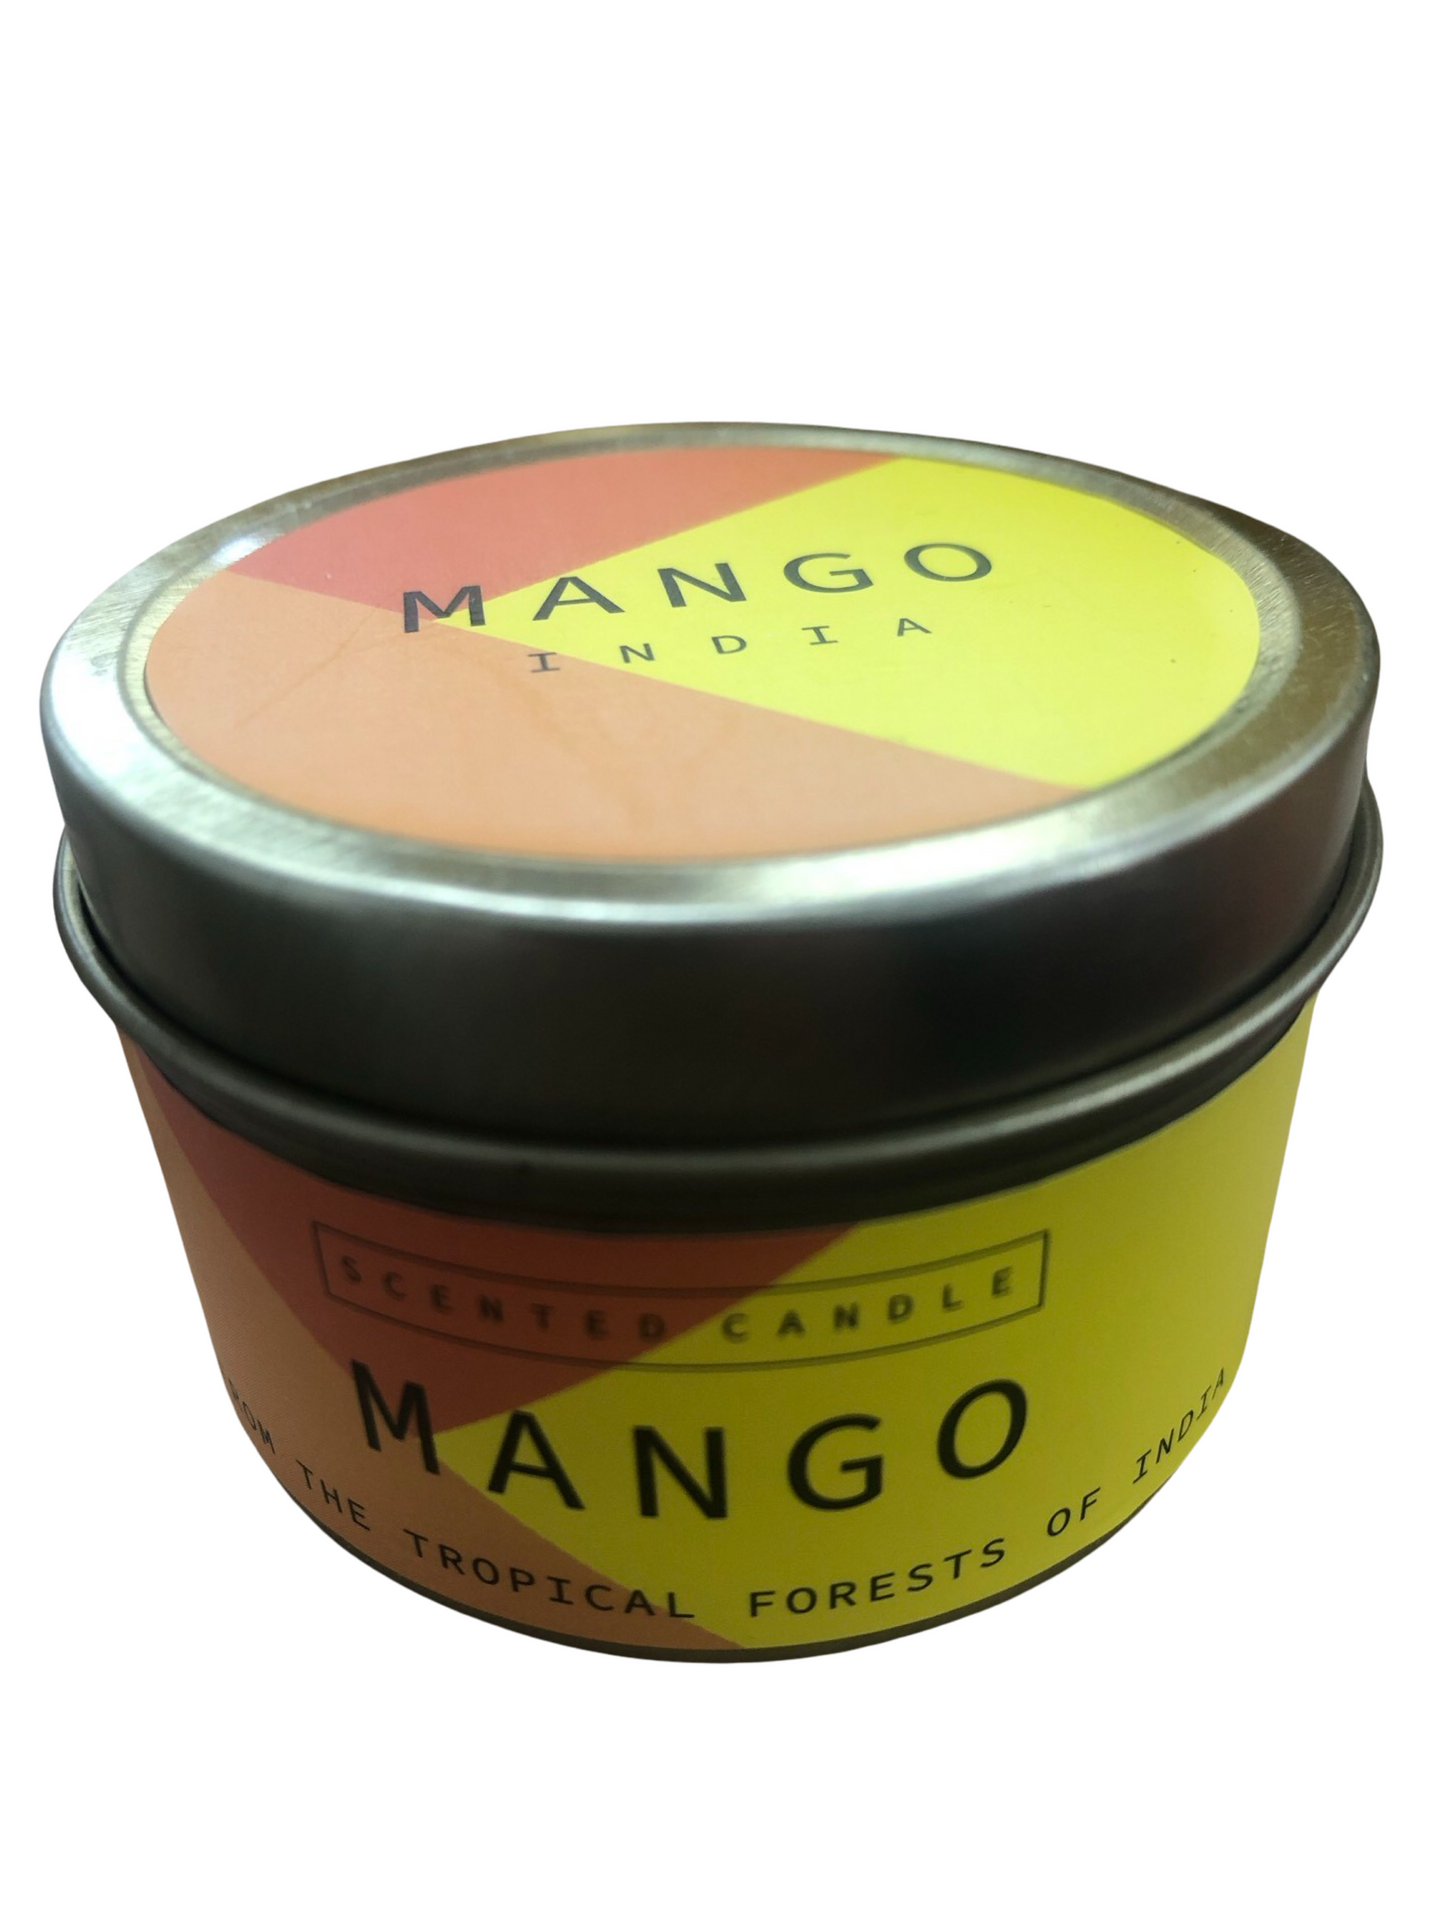 Mango scented candle